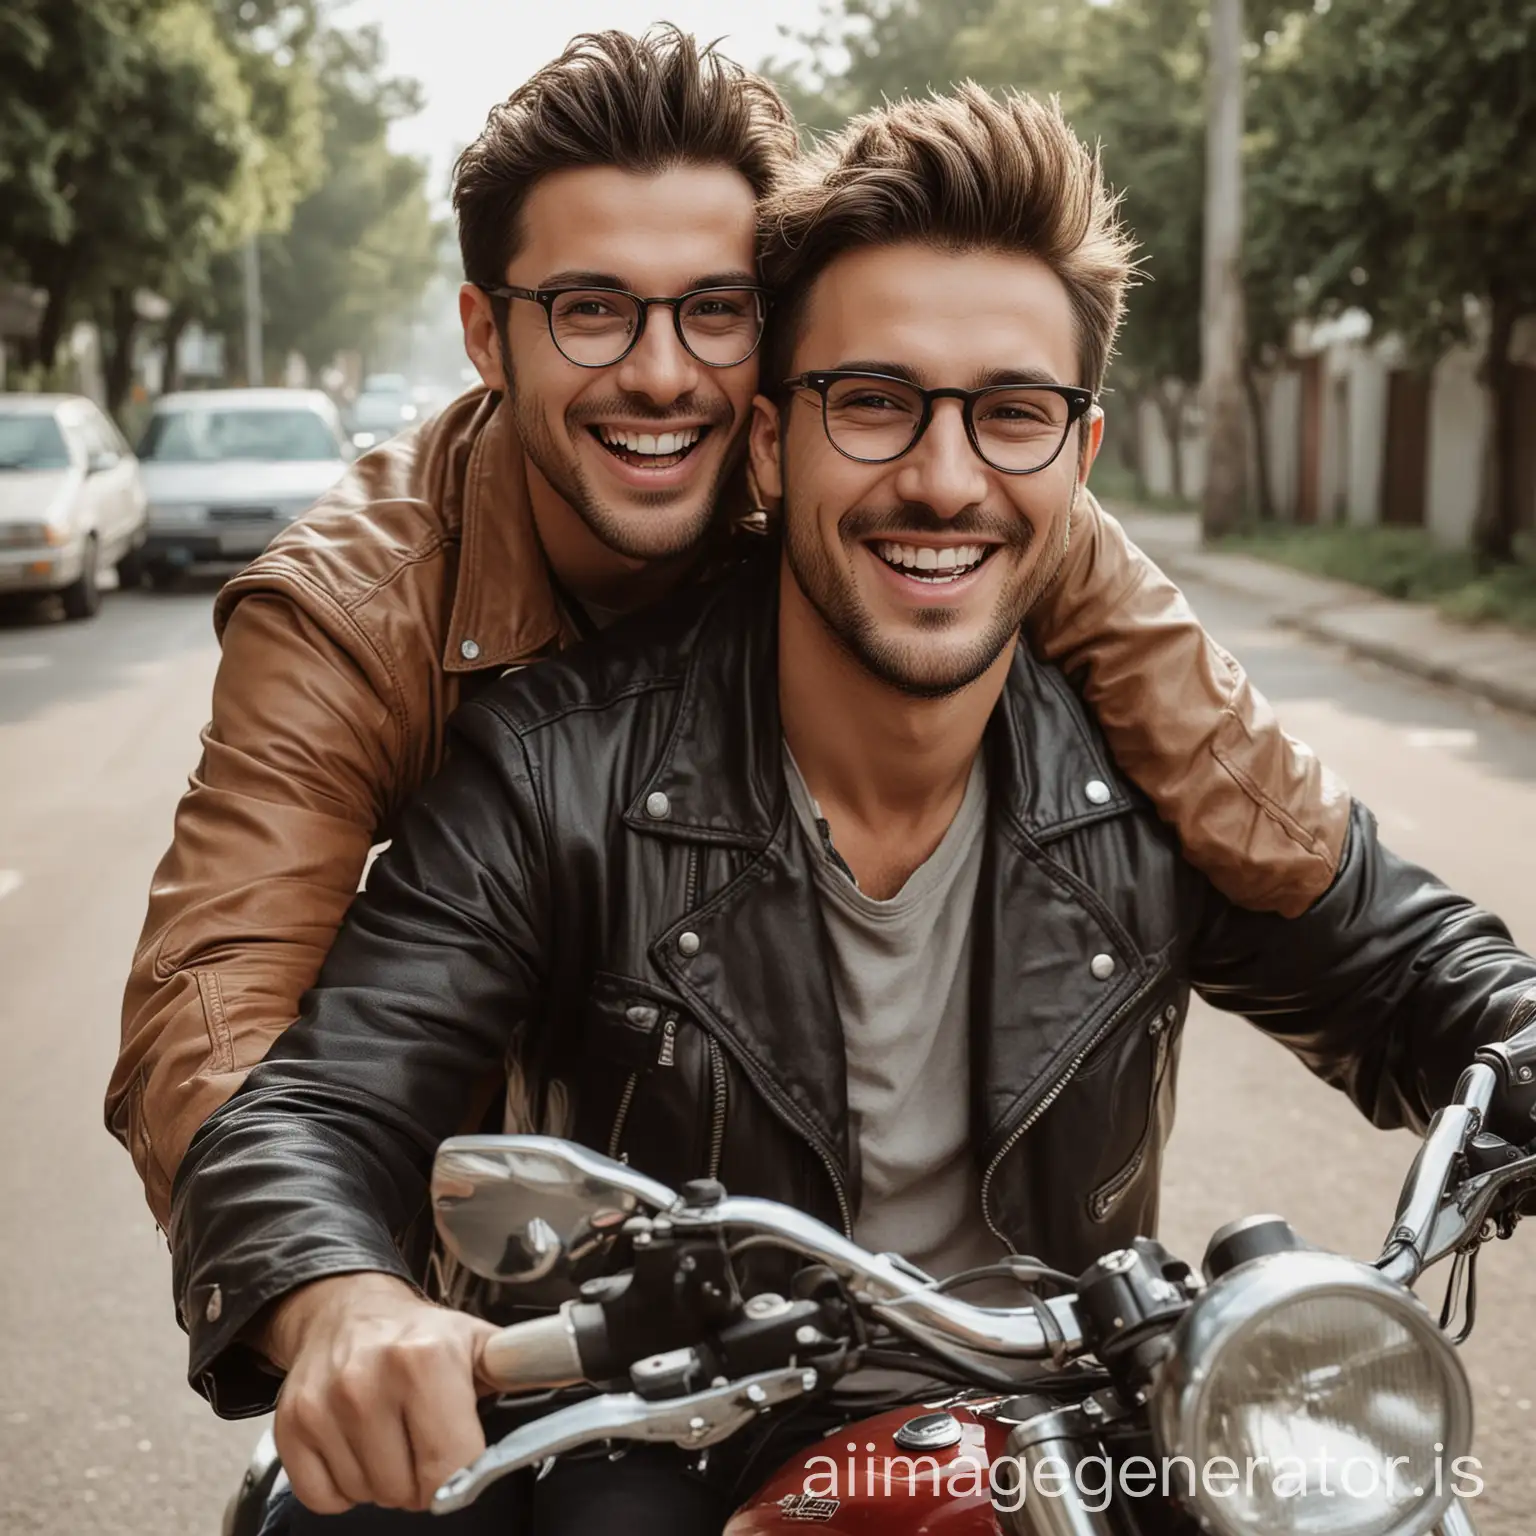 two men riding the same motorcycle and smiling and one of them has glasses on his eyes